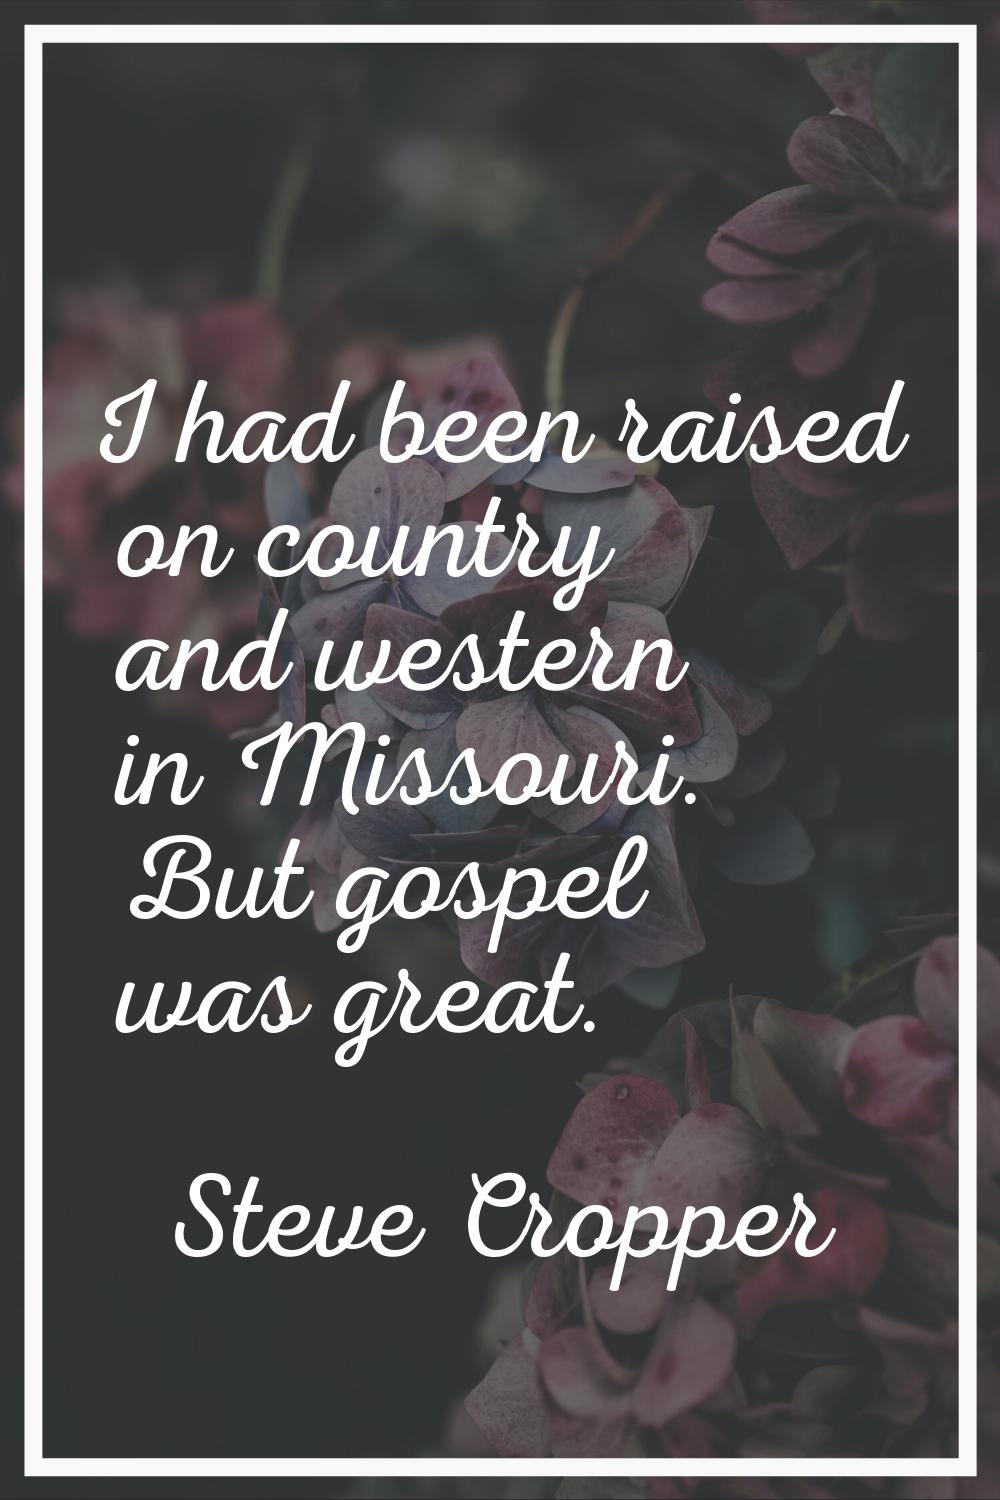 I had been raised on country and western in Missouri. But gospel was great.